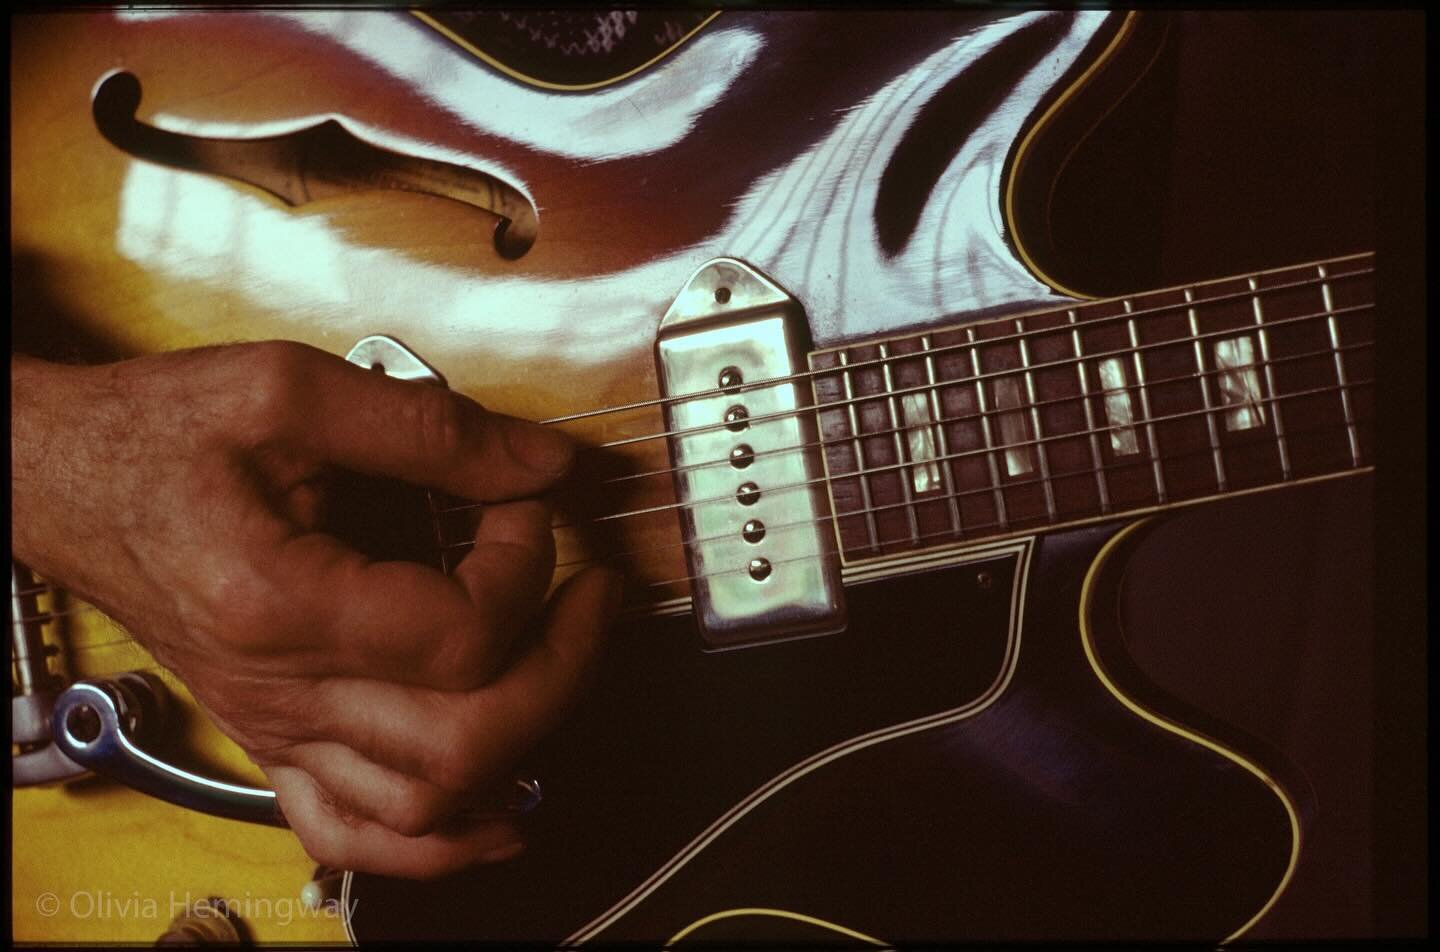 My dad playing his Gibson - he liked this picture 🤍 I took it on 35mm film. Image now with @millennium_images - I can hear him now saying &lsquo;fame at last Olivia&rsquo; 

#gibson
#photoarchive 
#guitarplaying
#dad
#josephhemingway
#guitar 
#mille